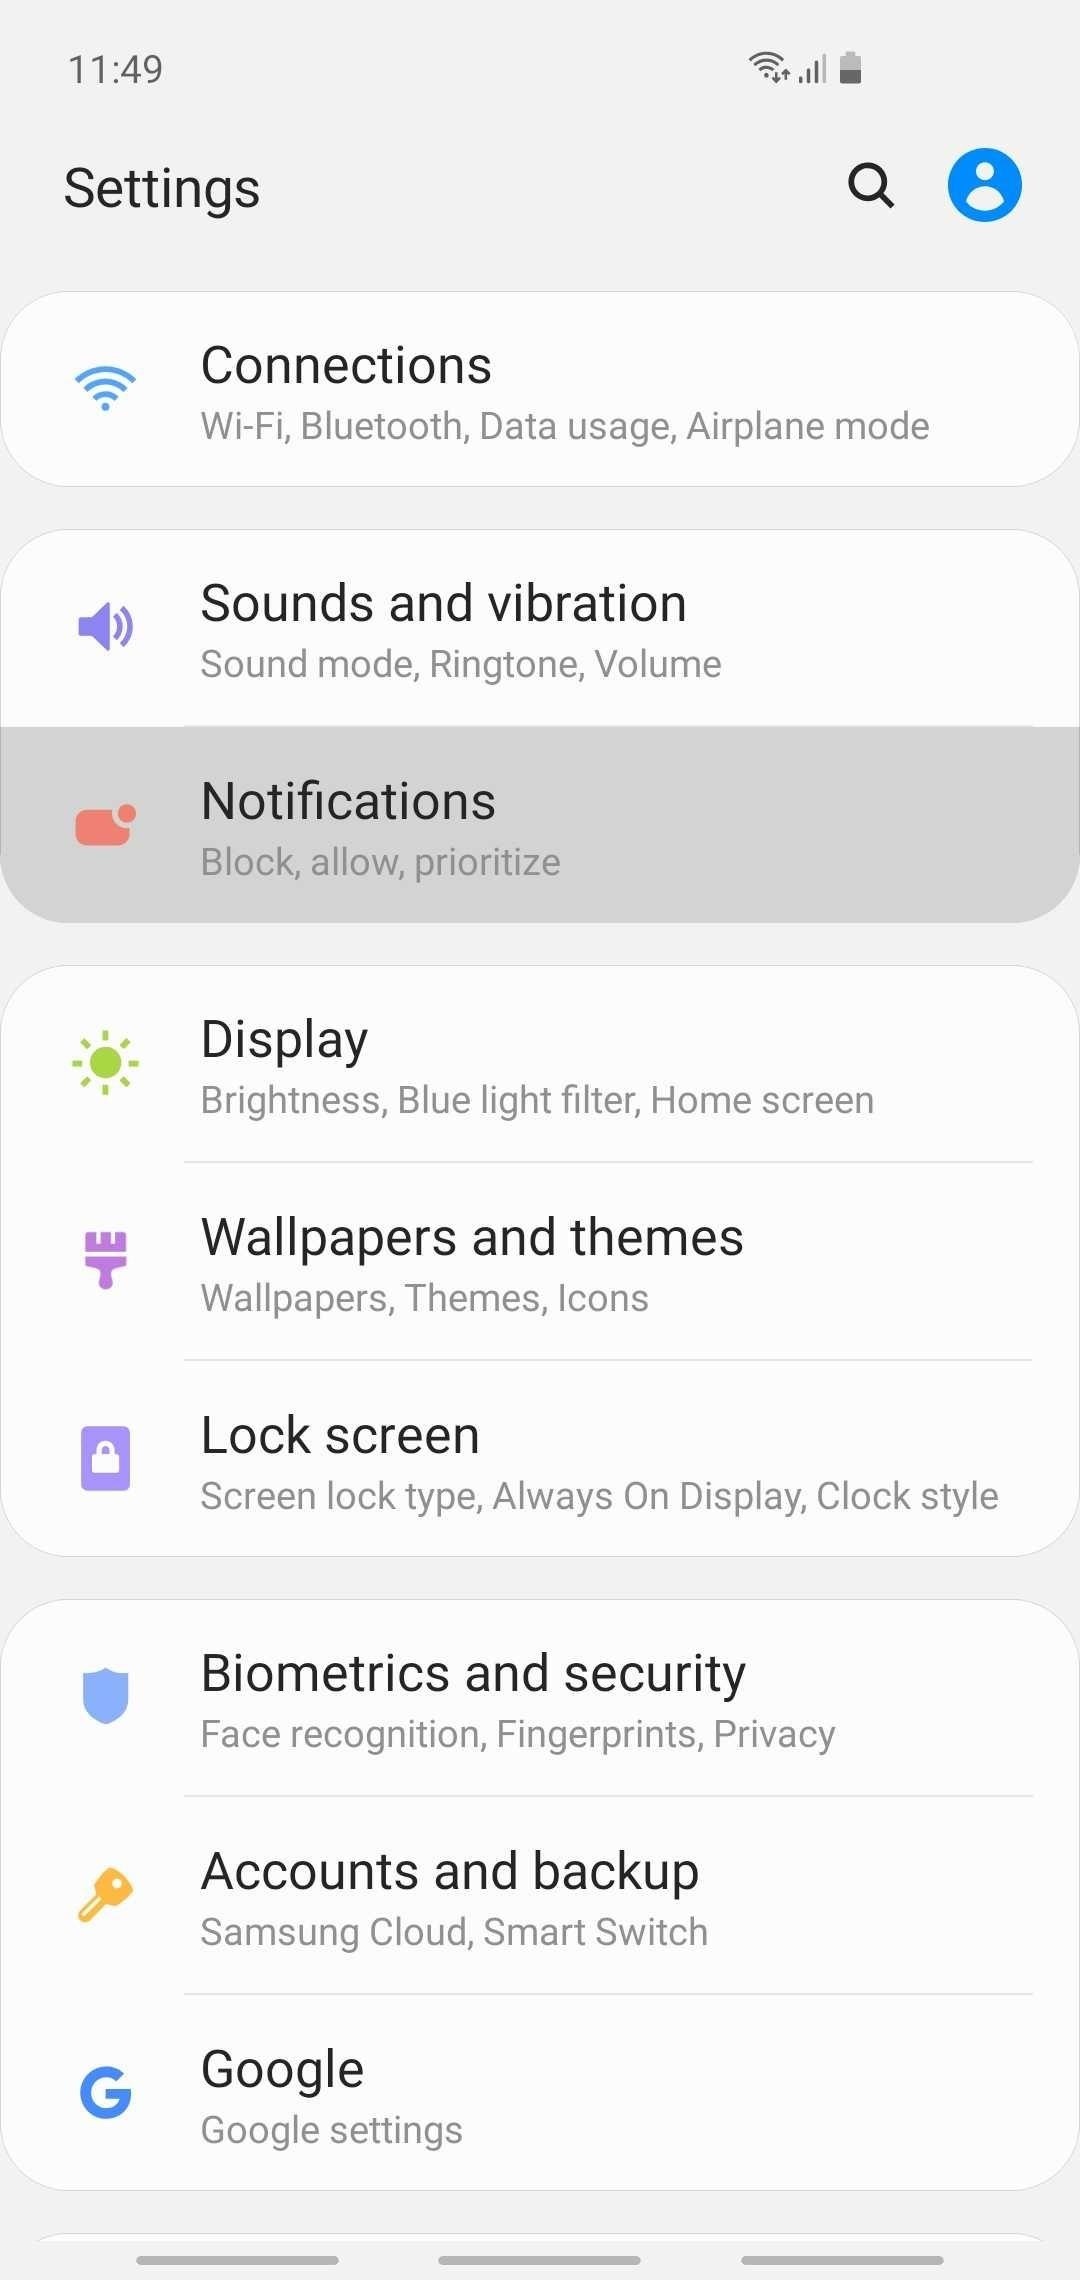 How to Disable App Icon Badges & Unread Counts on Your Galaxy S10